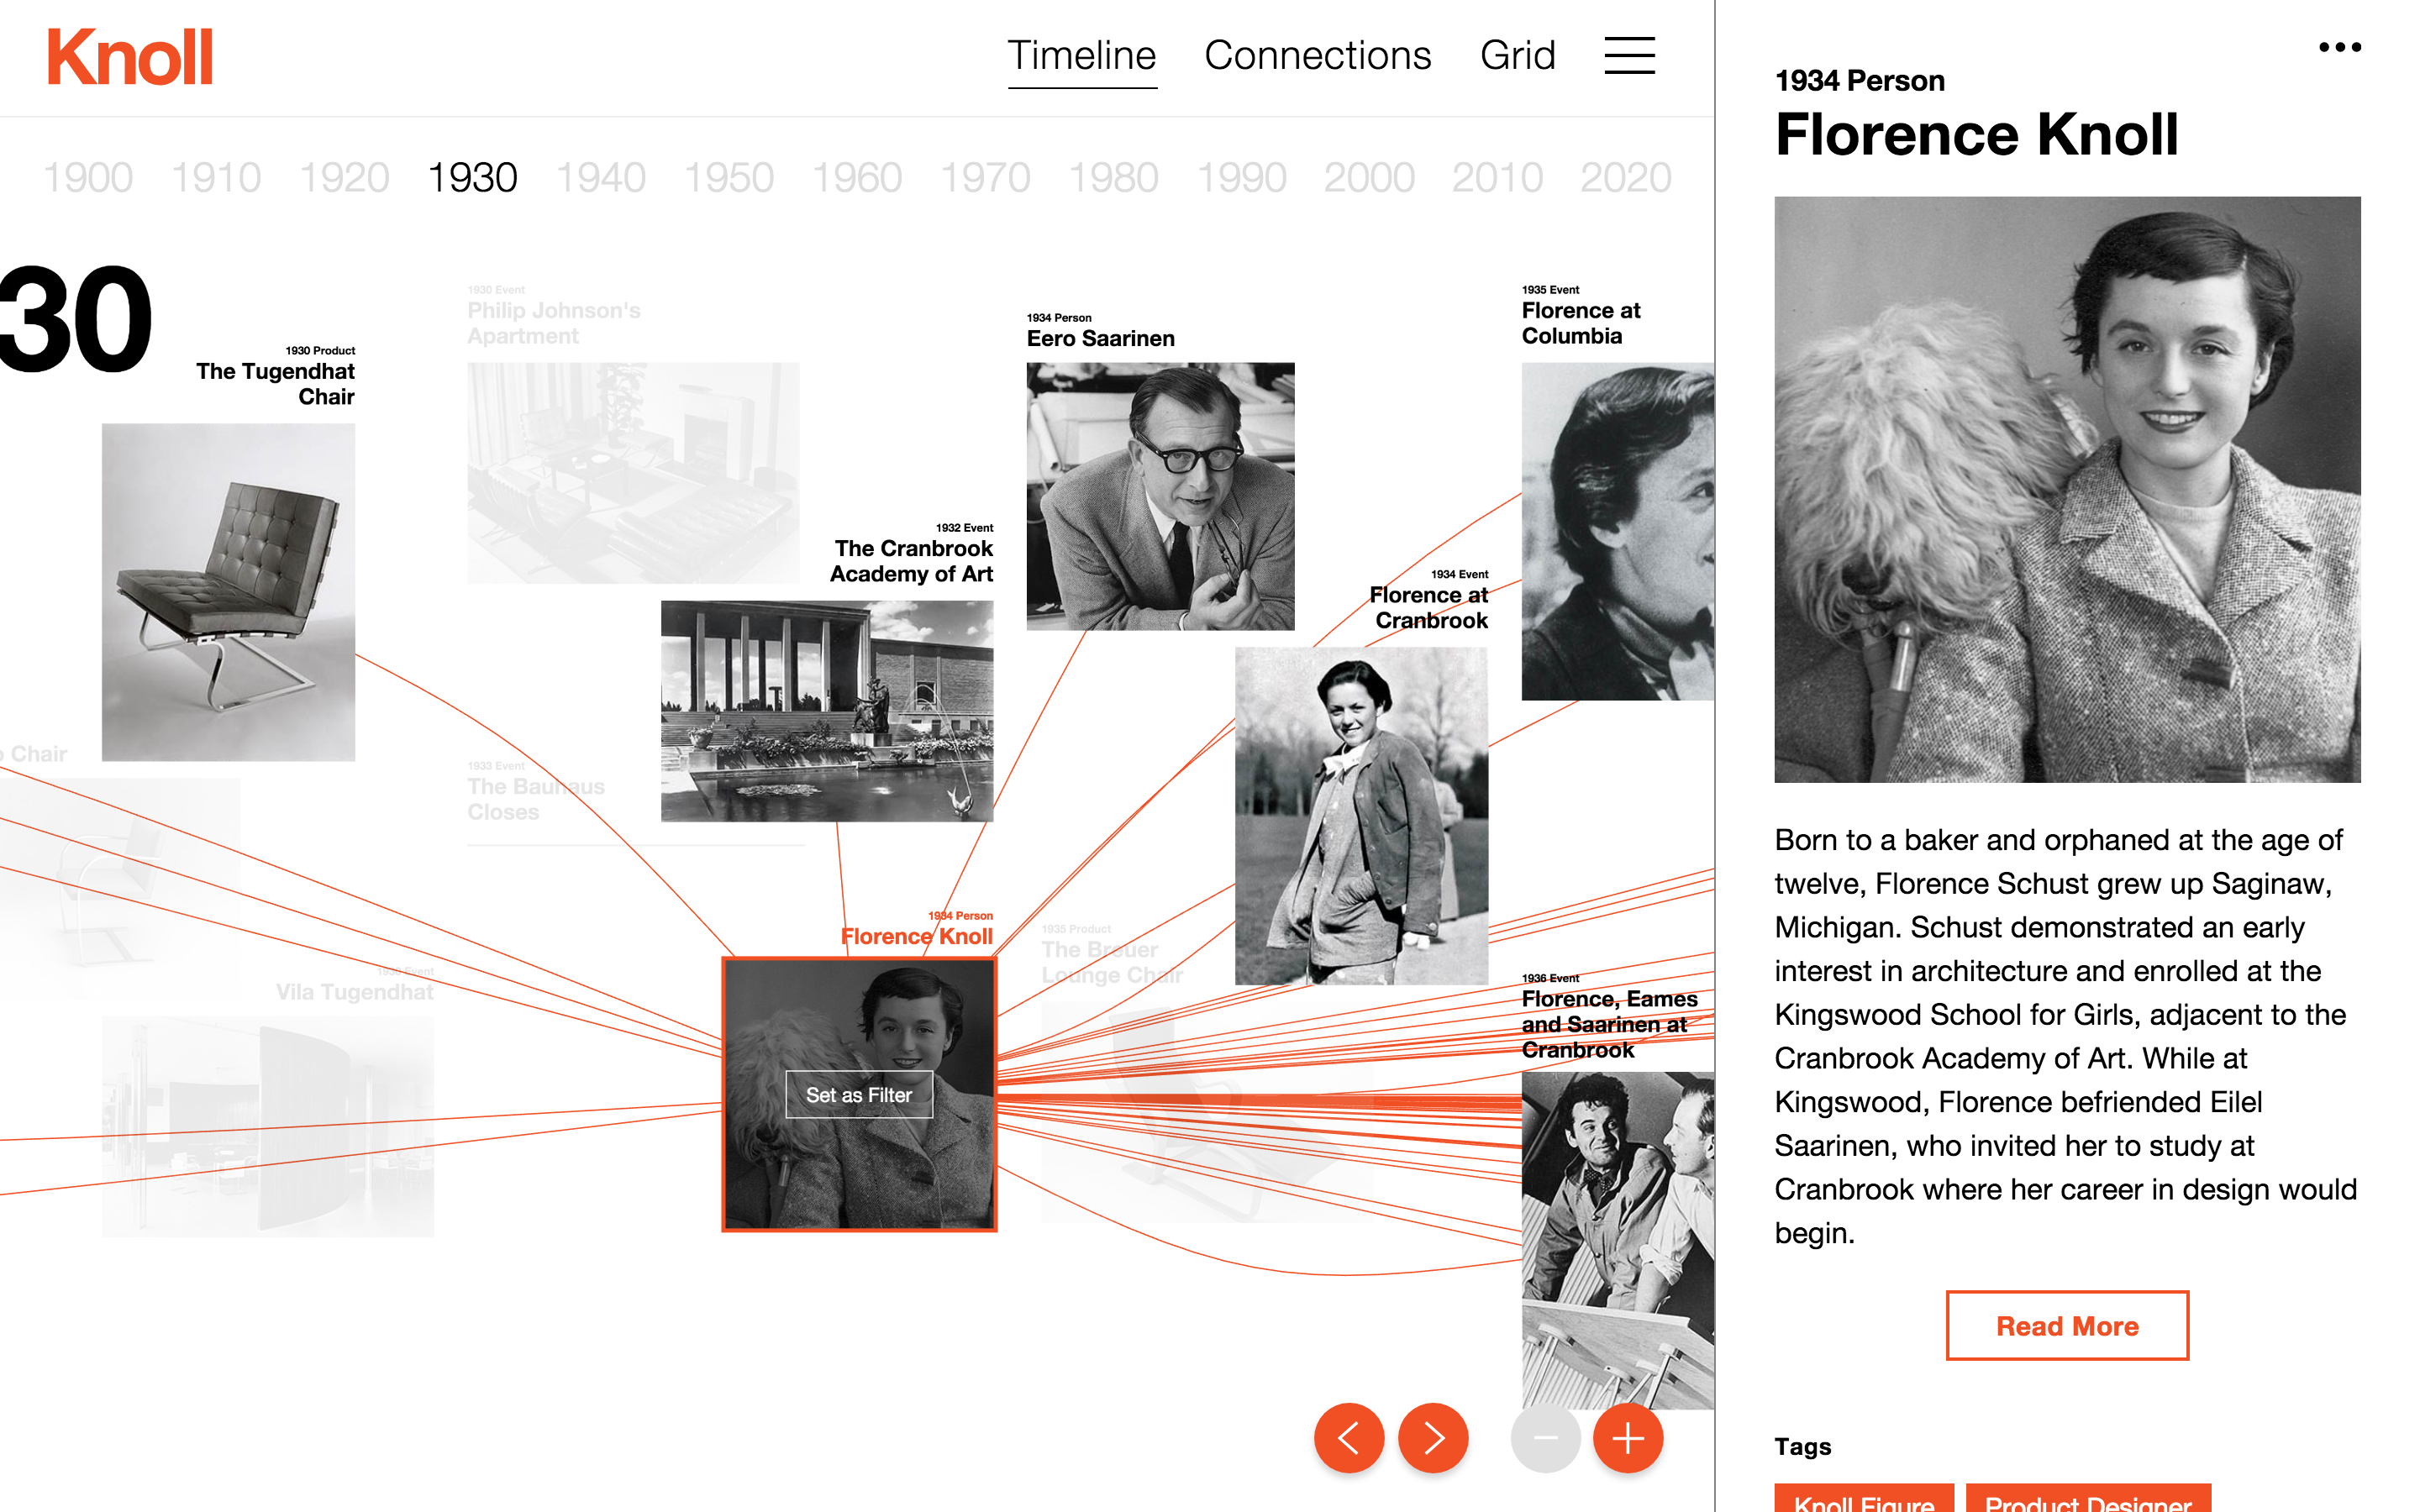 Knoll Archive: Timeline View 2